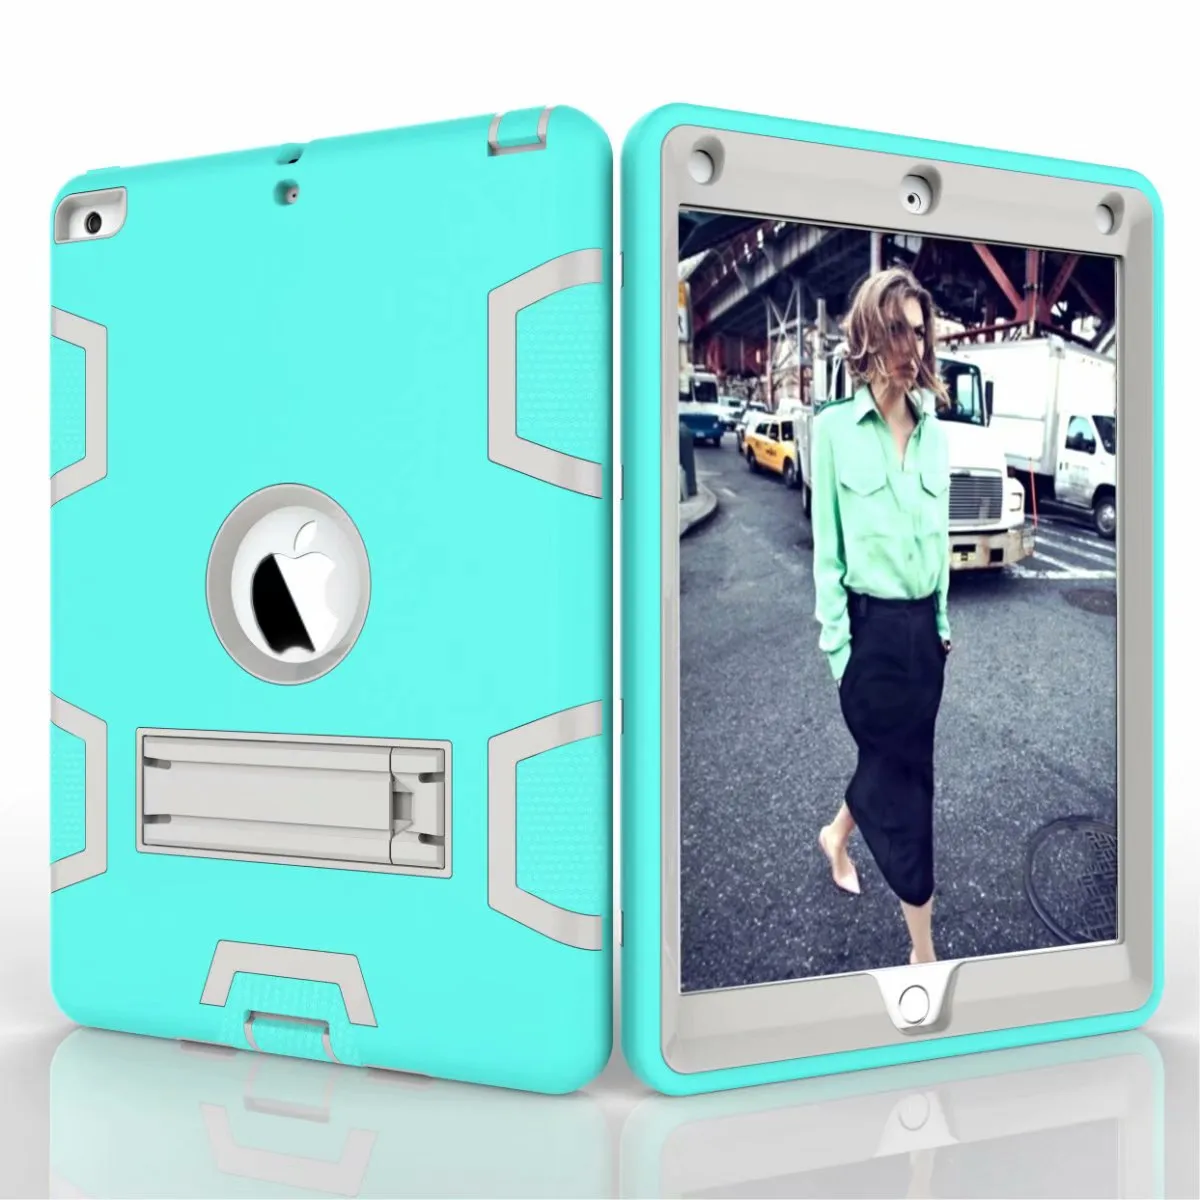 Case cover for apple ipad Air 2 tablet Stand Shockproof Heavy Duty Protect Skin Rubber Hybrid Case For iPad 6 9.7 tablet case